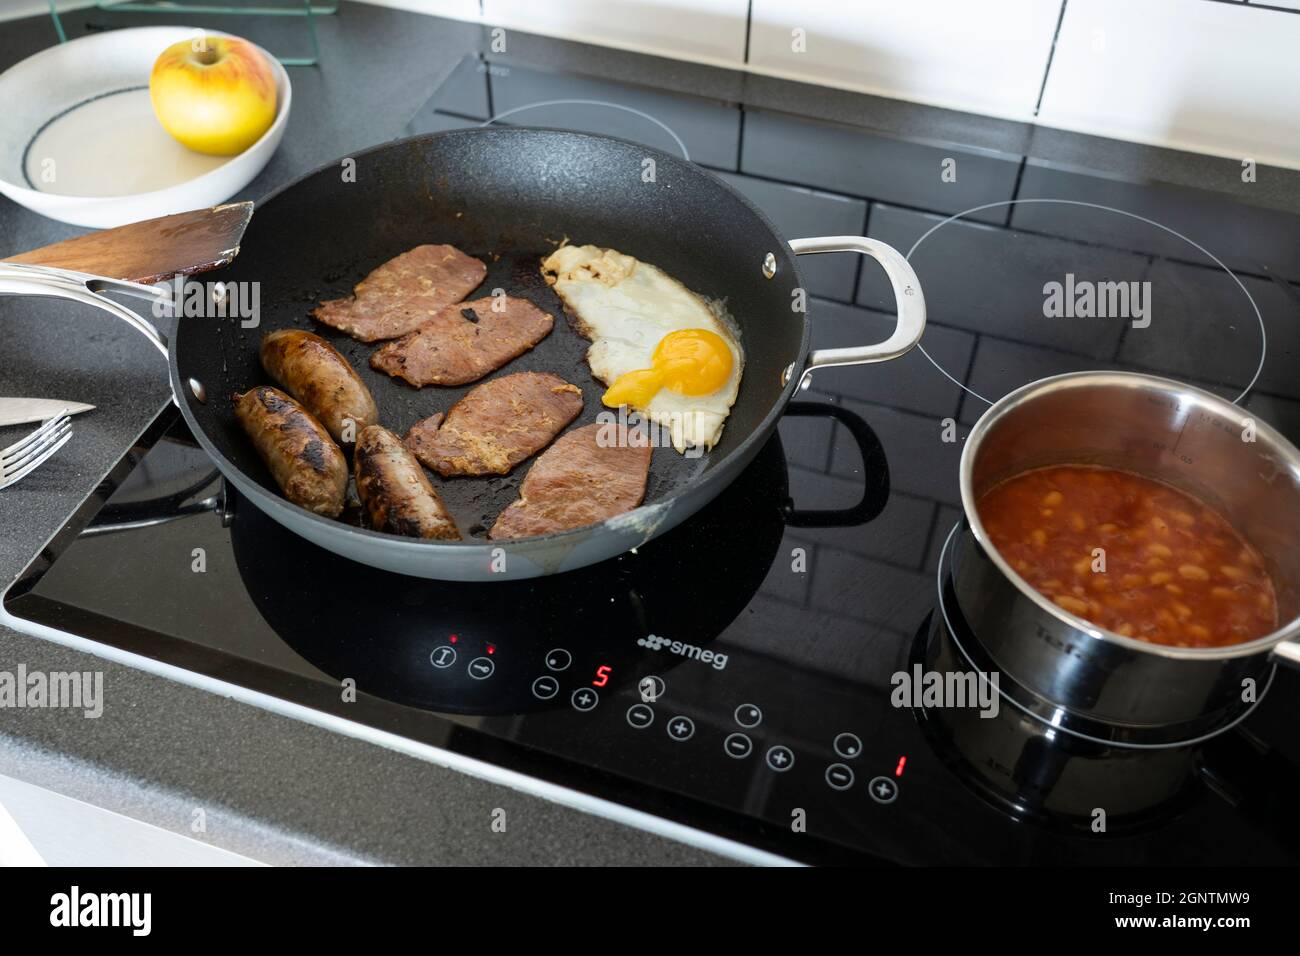 Traditional english breakfast in a kitchen with a fried egg, bacon rashers and sausages cooking in a frying pan, & baked beans in a saucepan. England Stock Photo